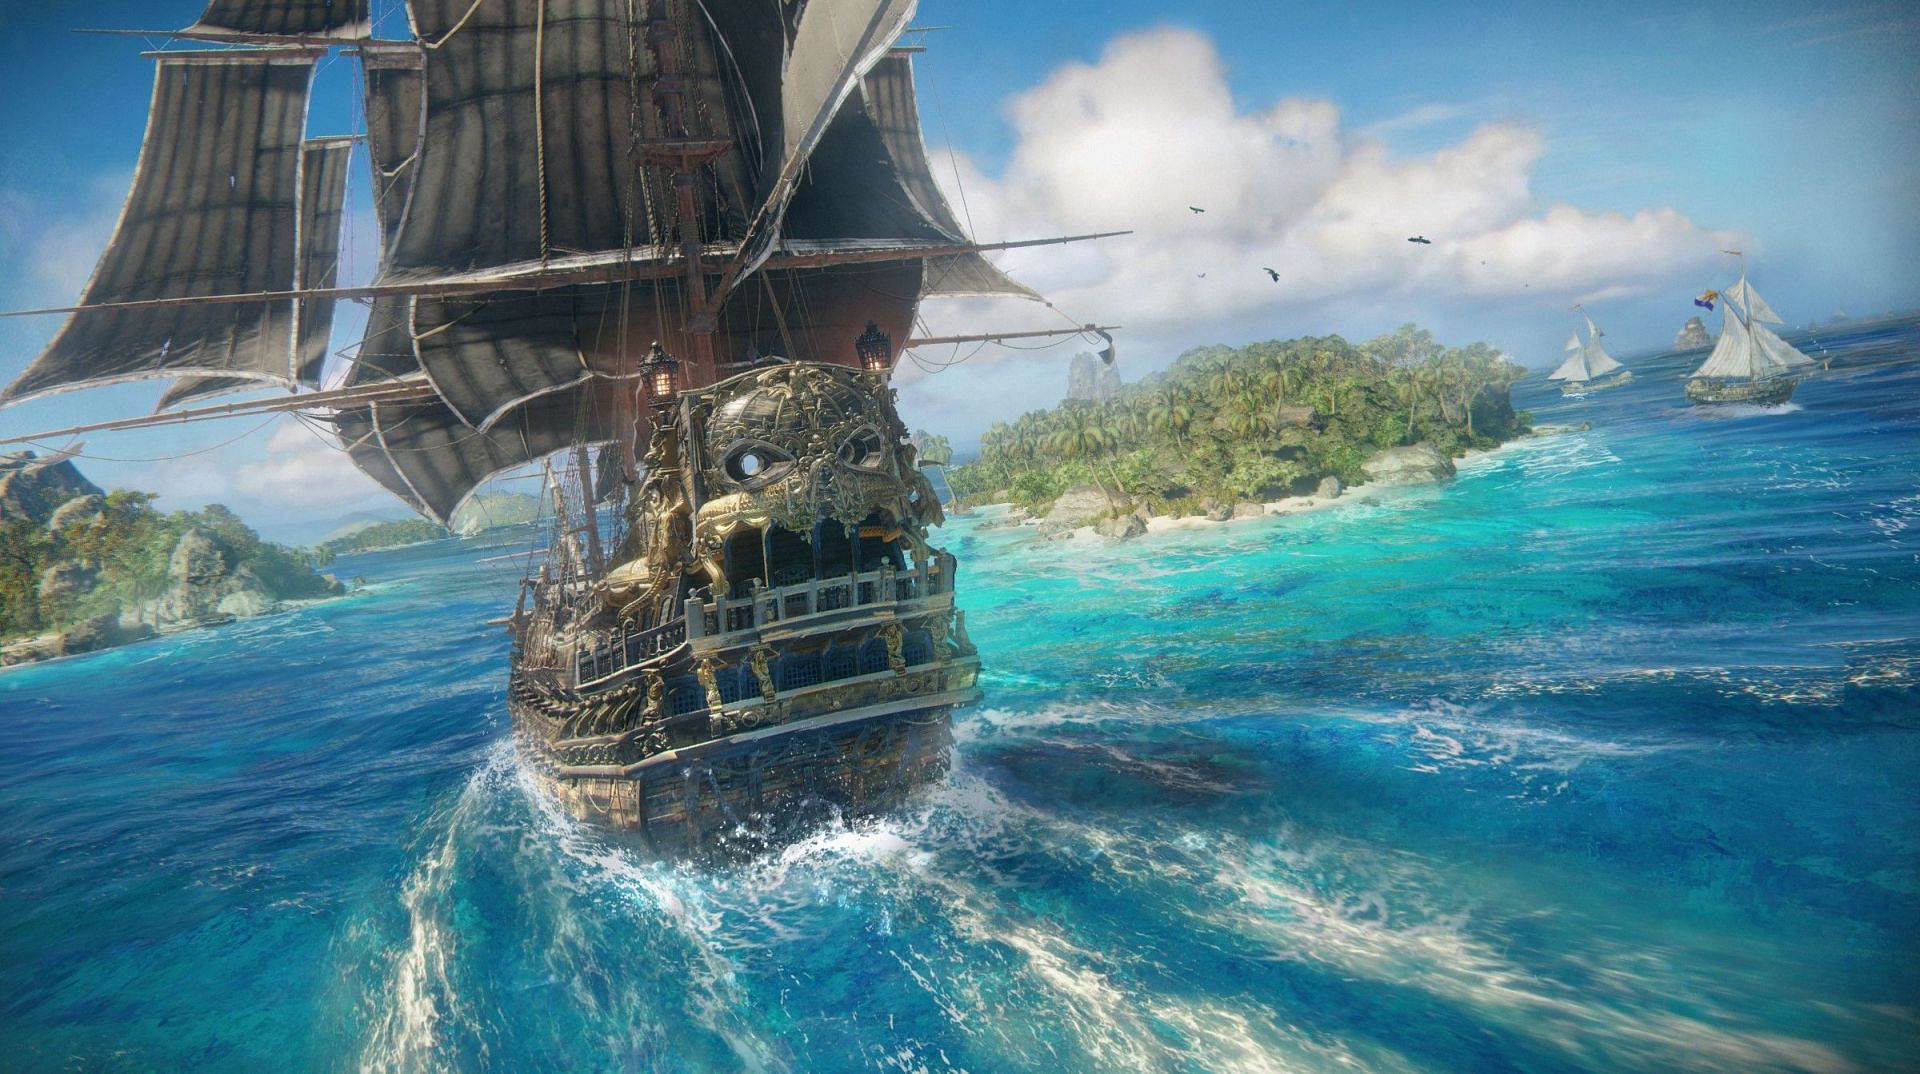 Skull and Bones&#039; developers, Ubisoft Singapore showed off gameplay ahead of the upcoming launch (Image via Ubisoft)